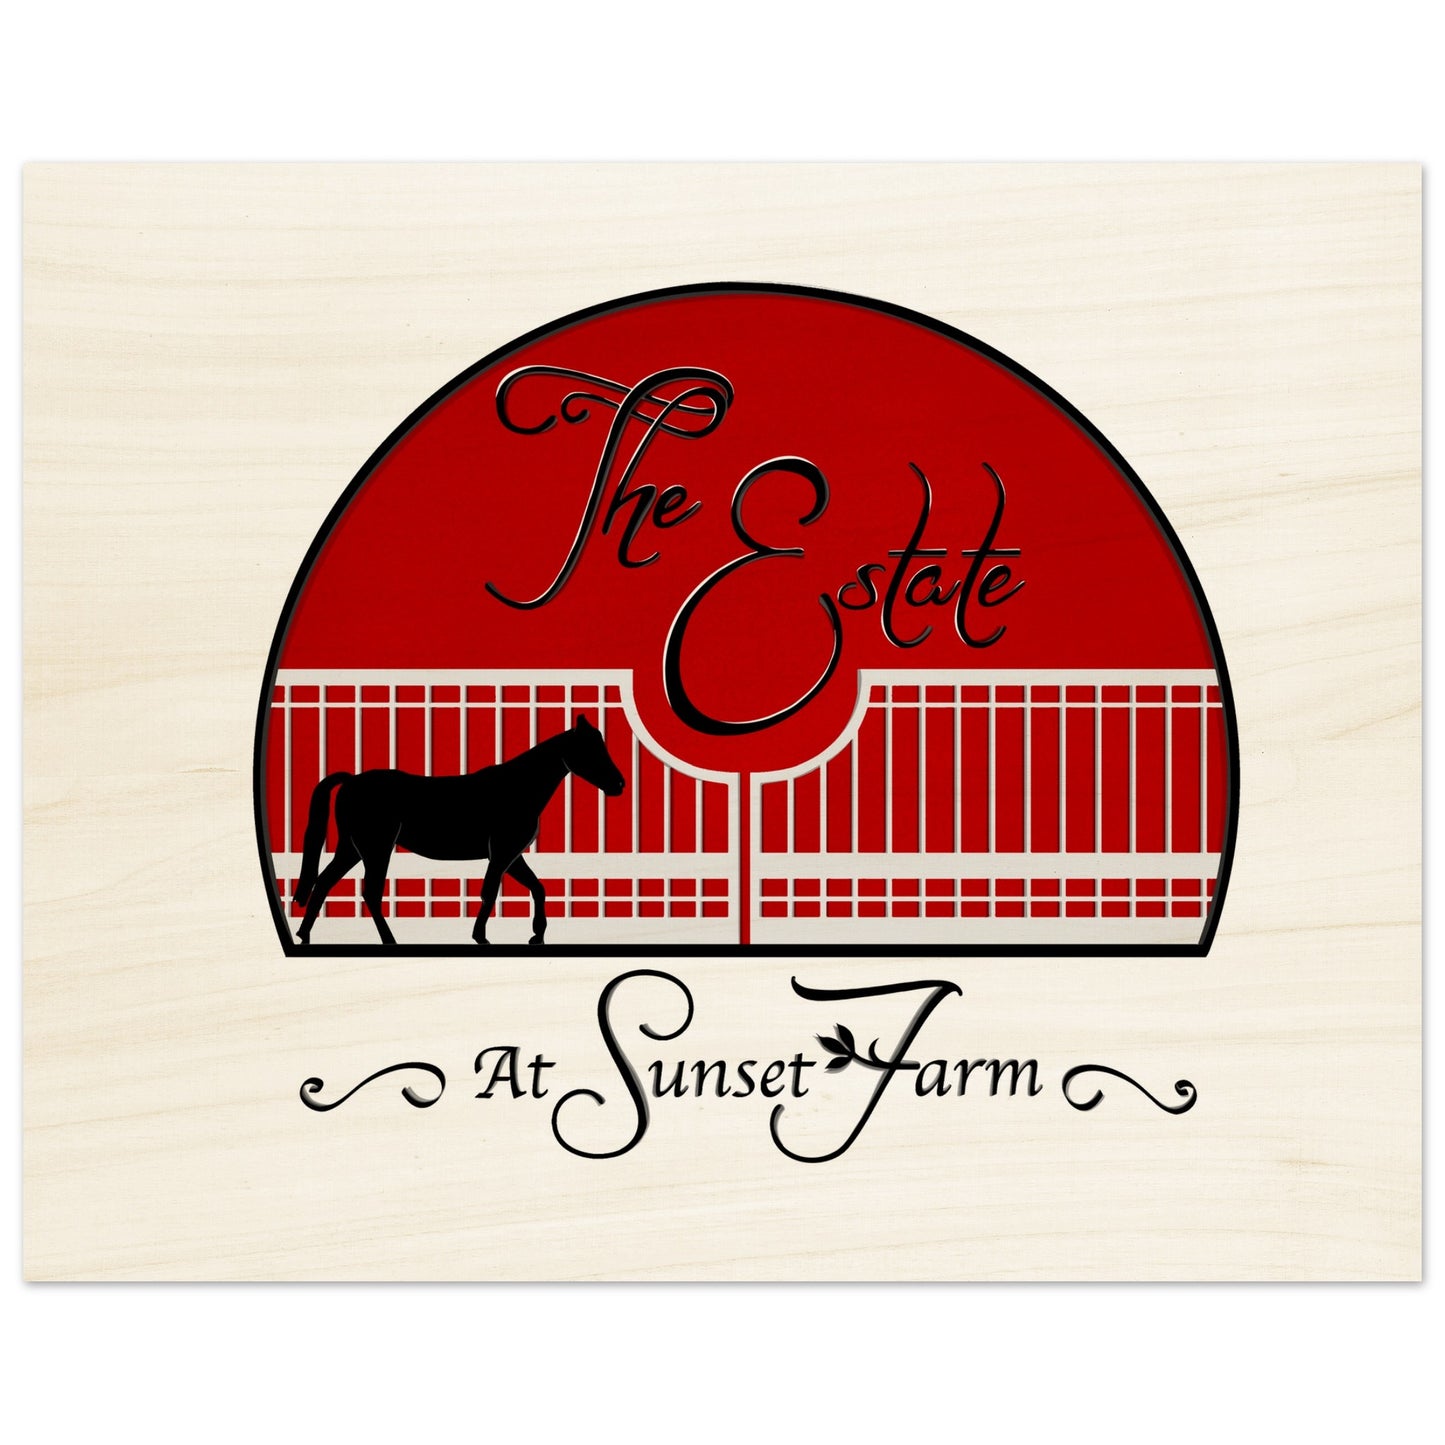 The Estate at Sunset Farms - Wood Prints